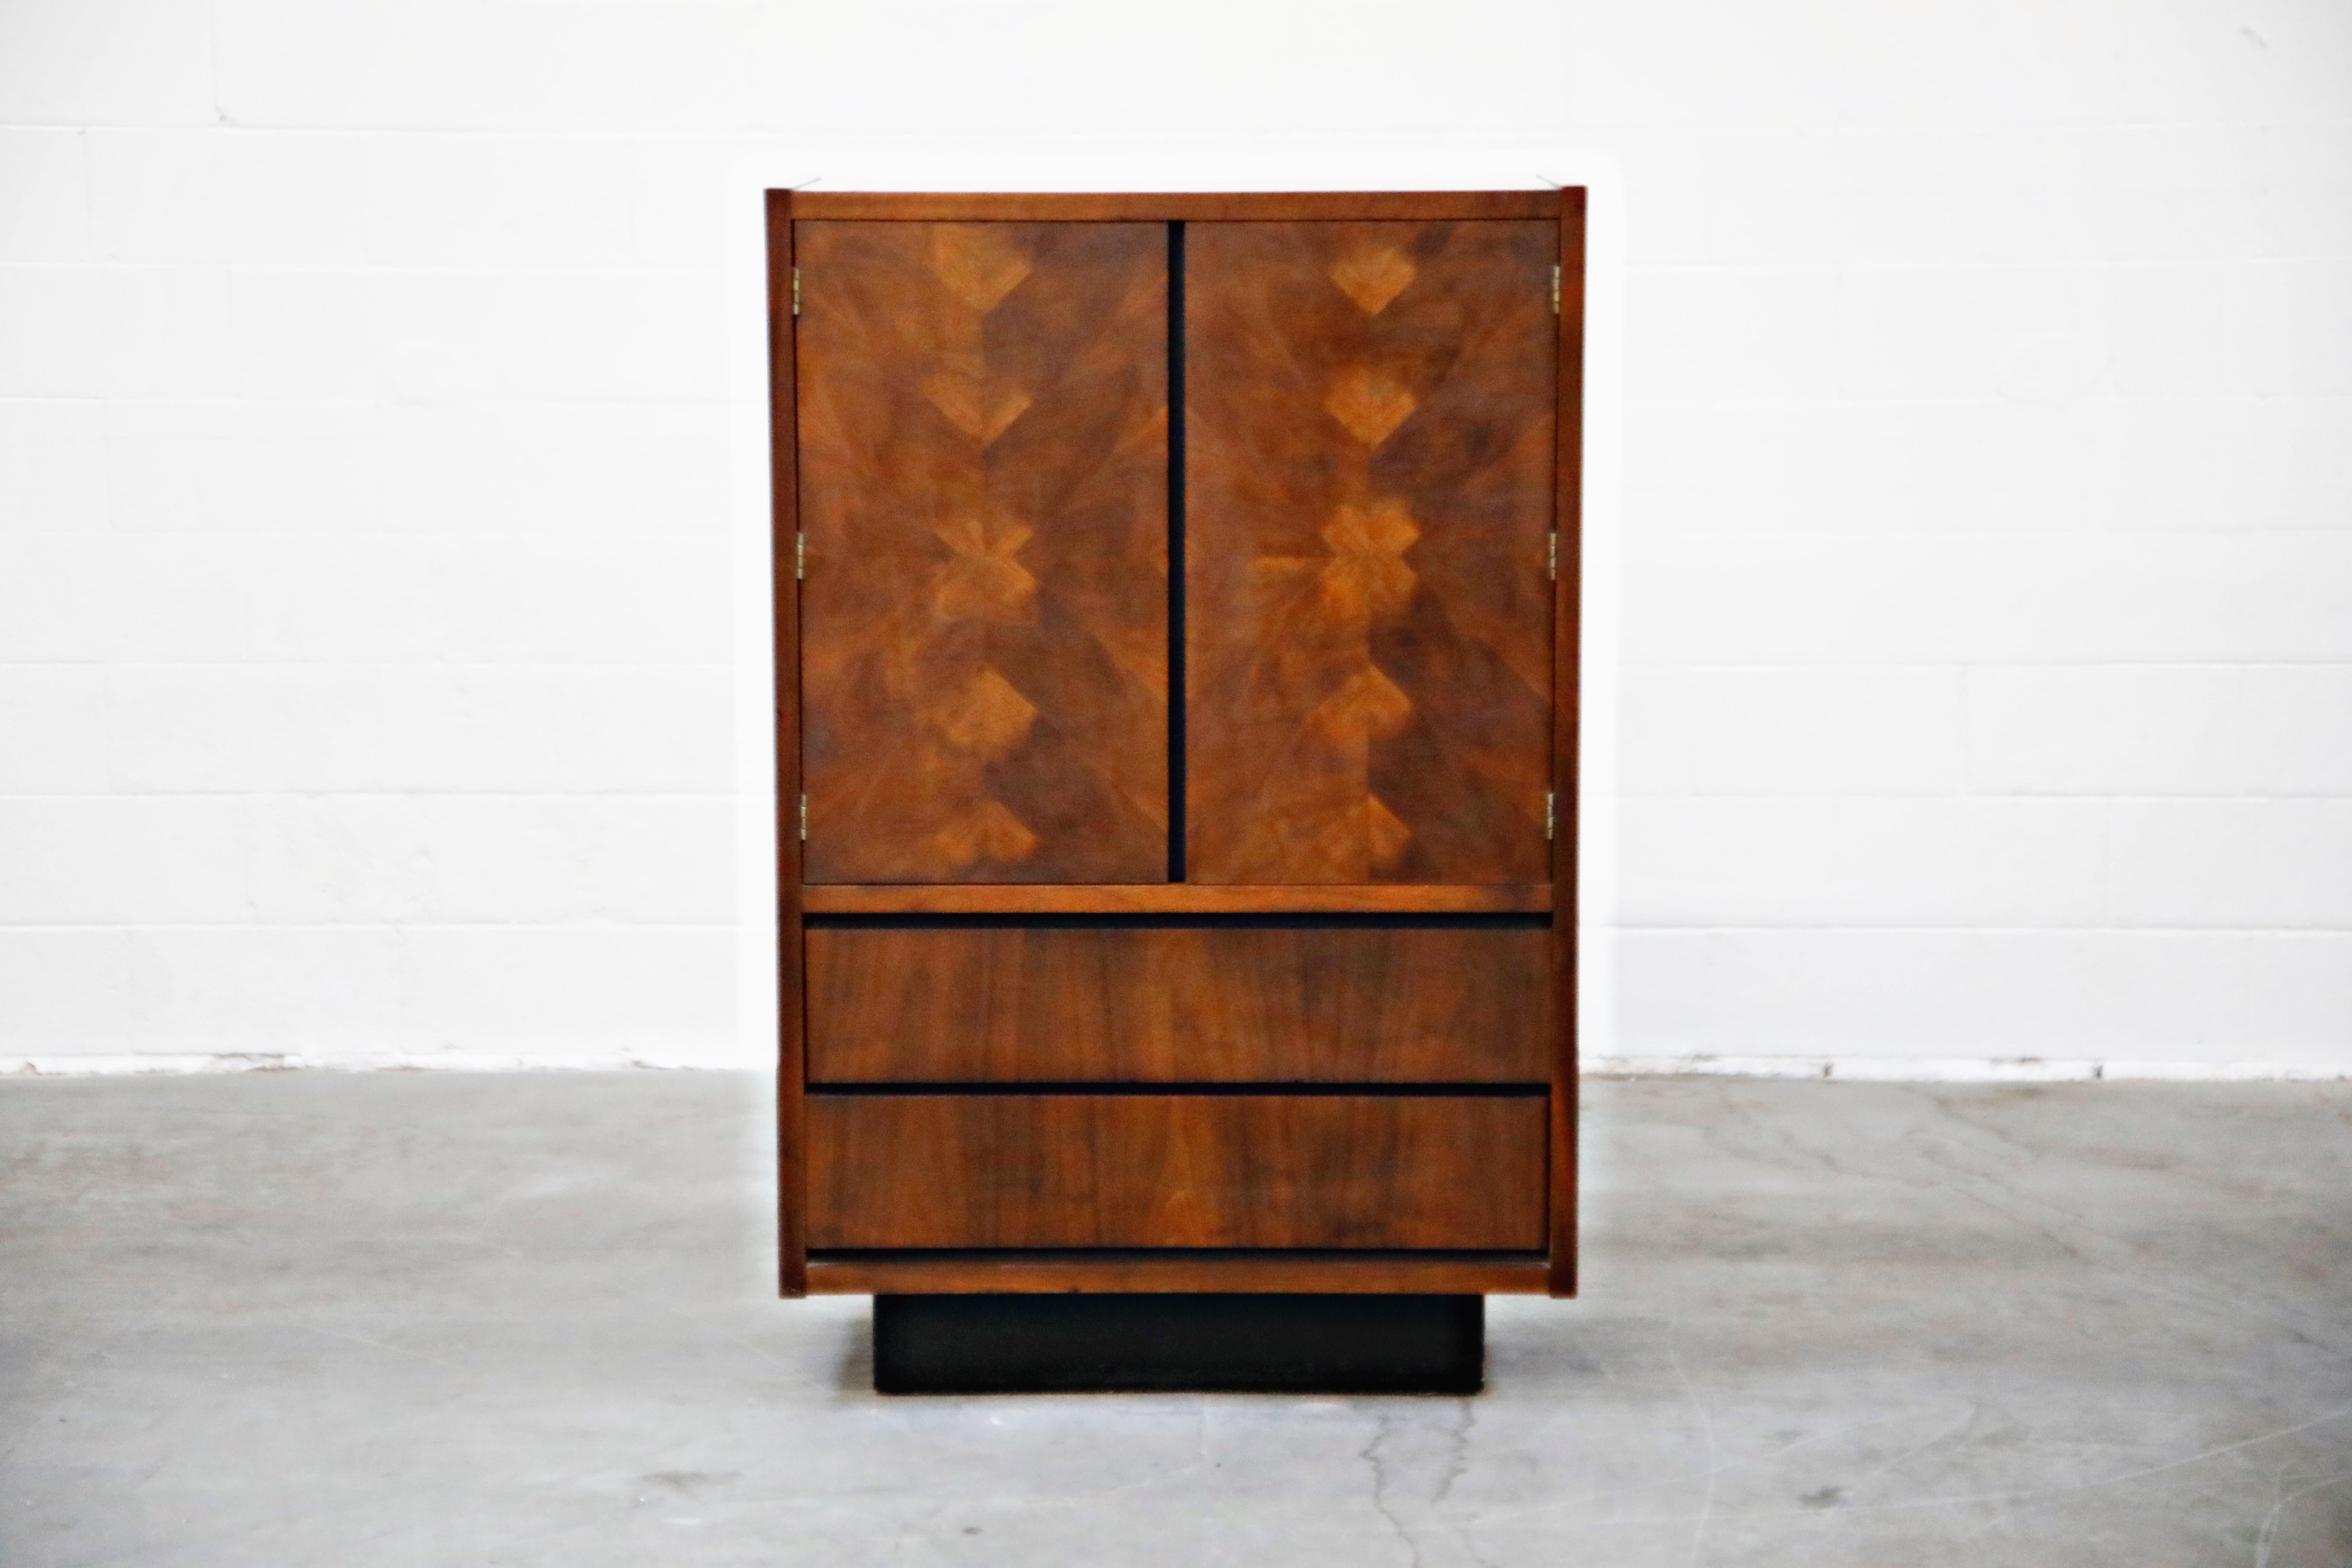 A classy and sophisticated 1960s American modern gentleman's highboy dresser by Lane. The burled wood doors and drawers feature a patchwork design with large upper cabinet doors over two drawers standing atop a black plinth base. Inside the upper